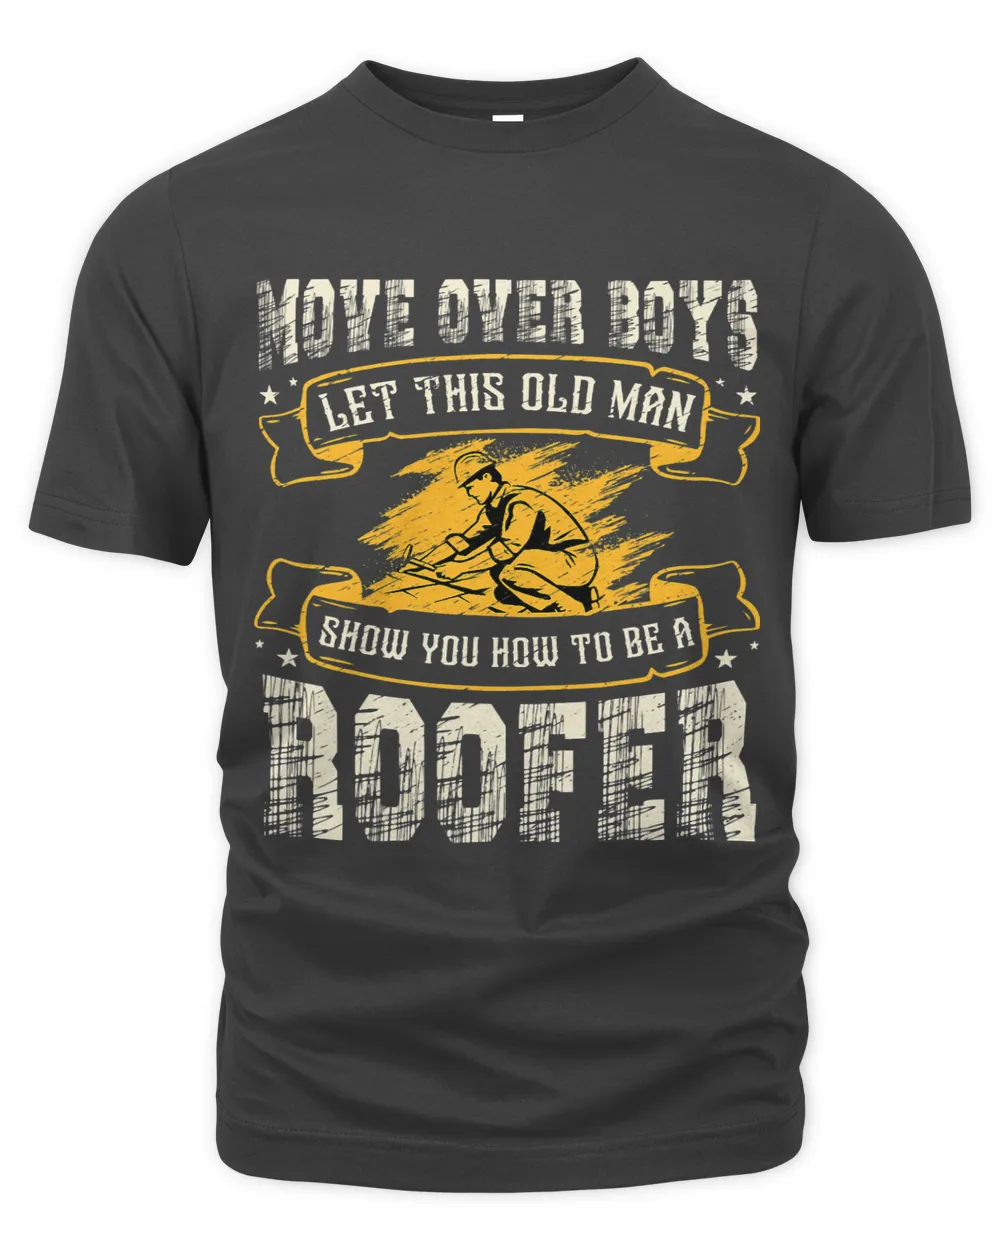 Move Over Boys Let This Old Man Show You How To Be A Roofer